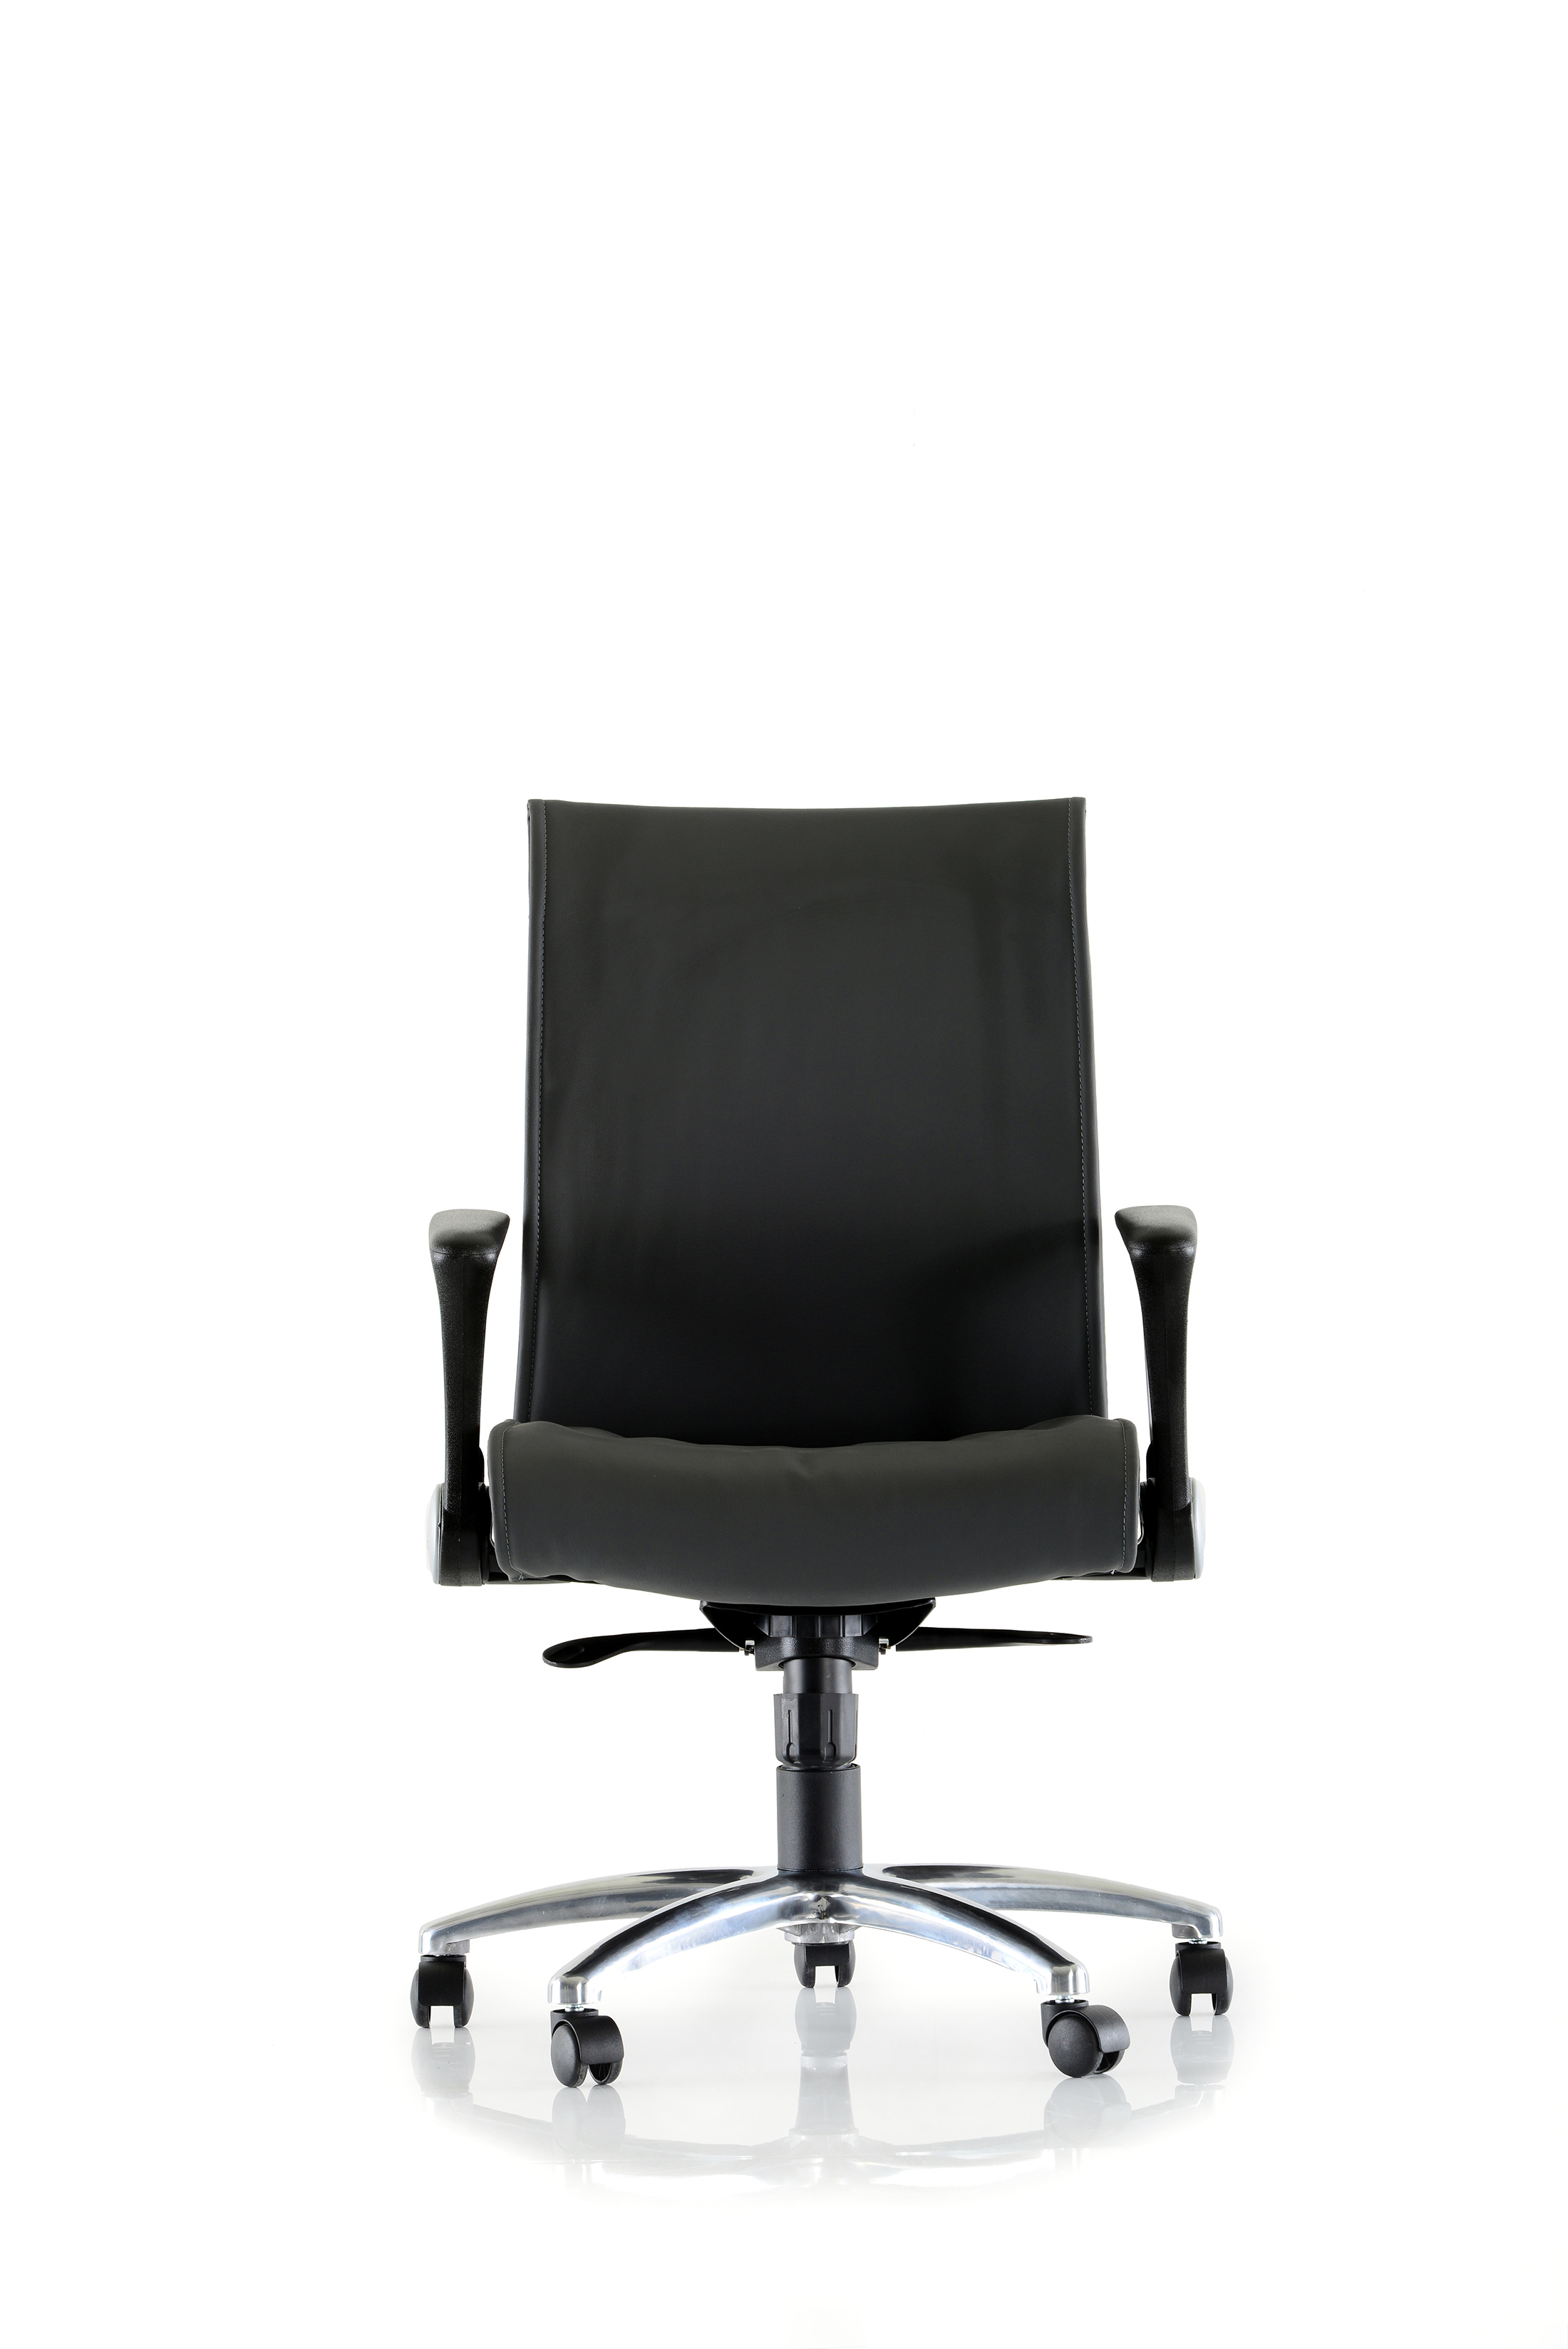 ULTIMA 100C CHIEF CHAIR